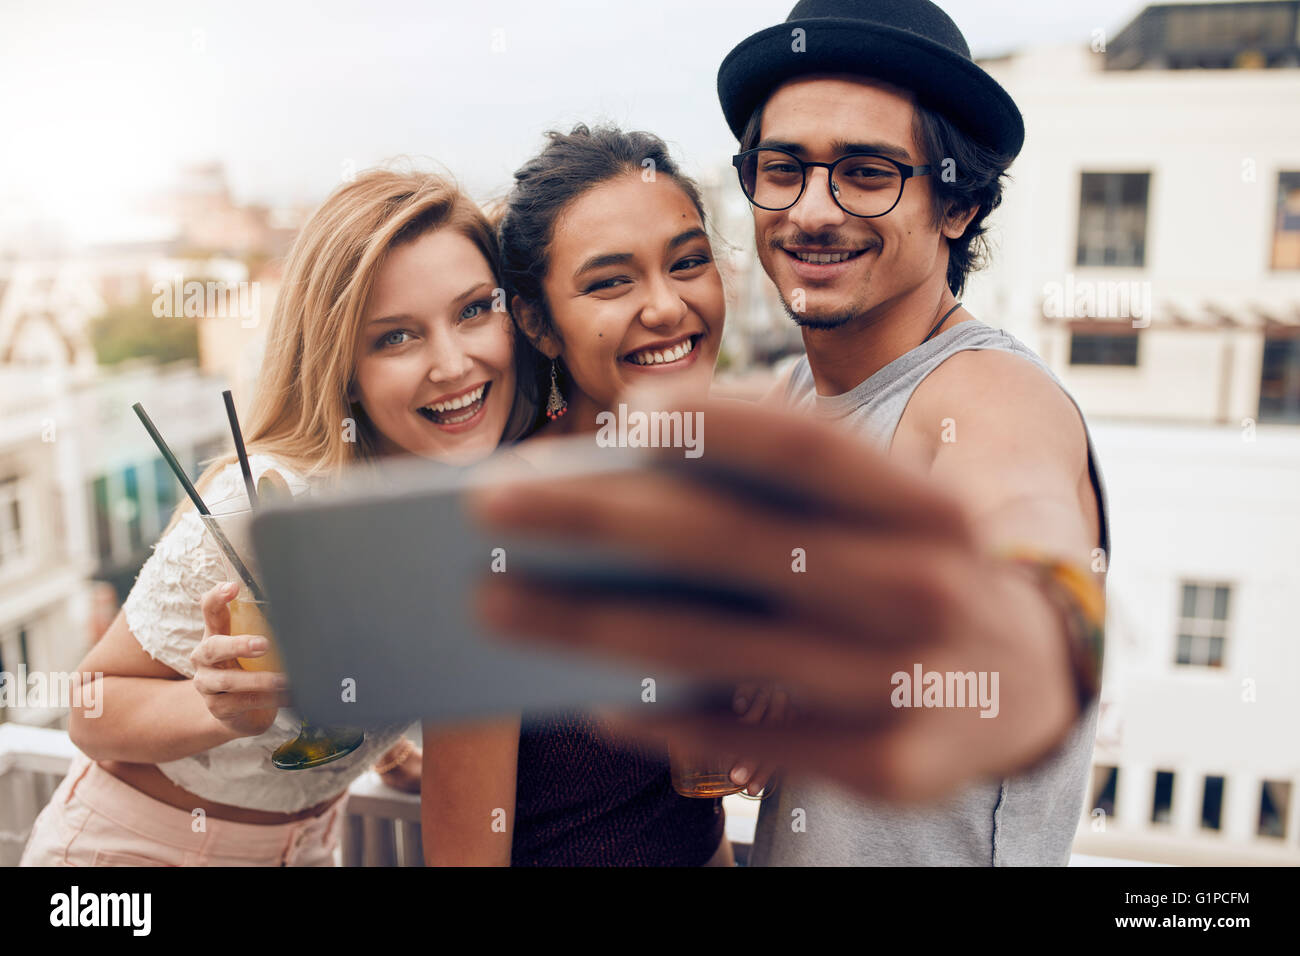 Shot of young man with female friends taking selfie on mobile phone. Young people partying on rooftop having fun. Stock Photo